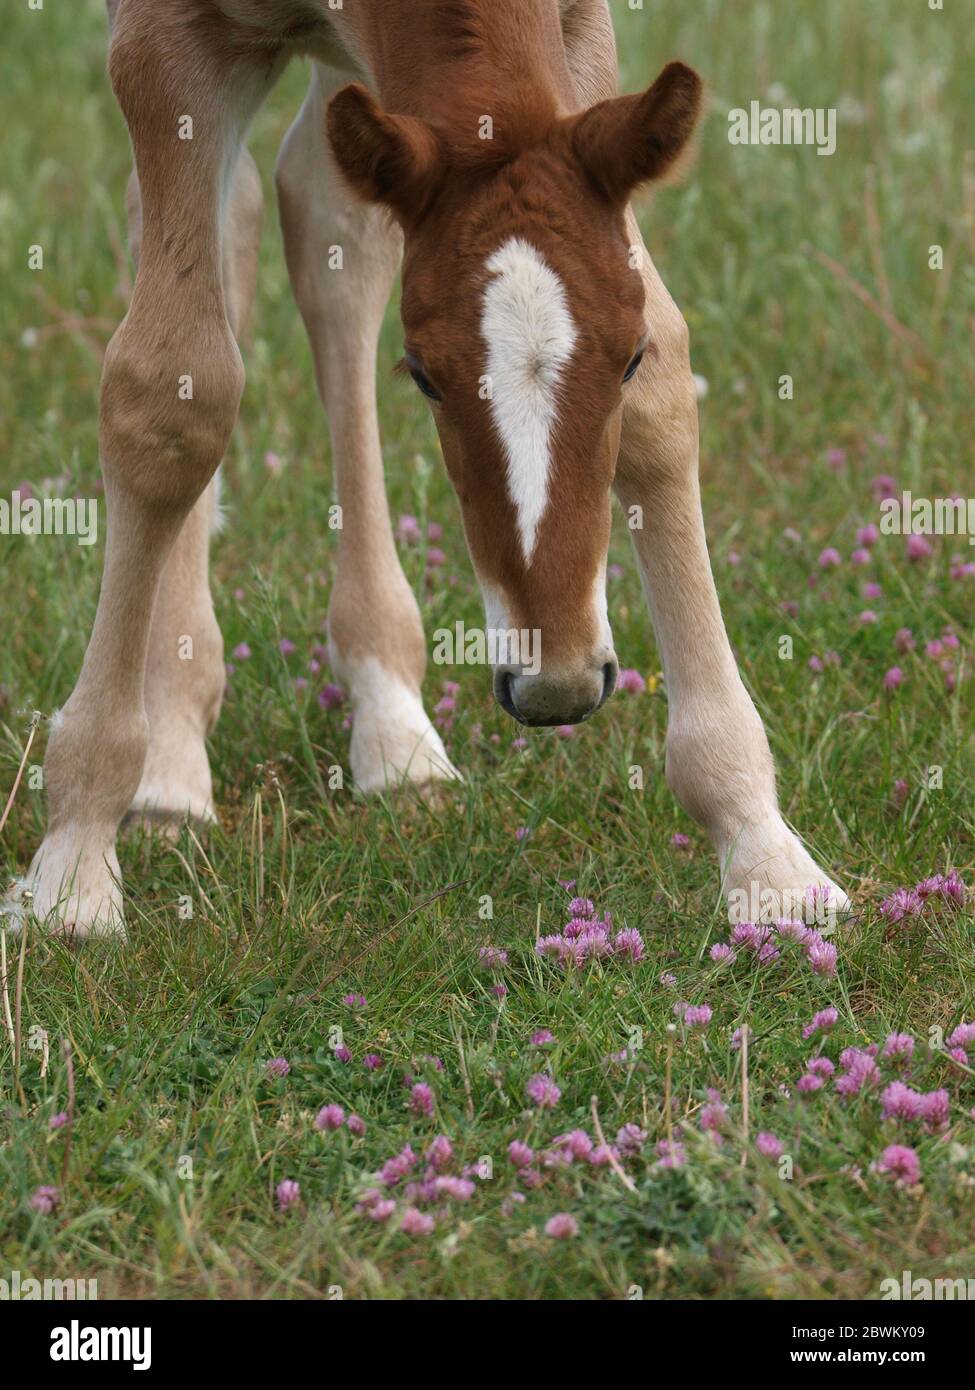 A rare breed Suffolk Punch foal tries to bend down to reach the grass. Stock Photo